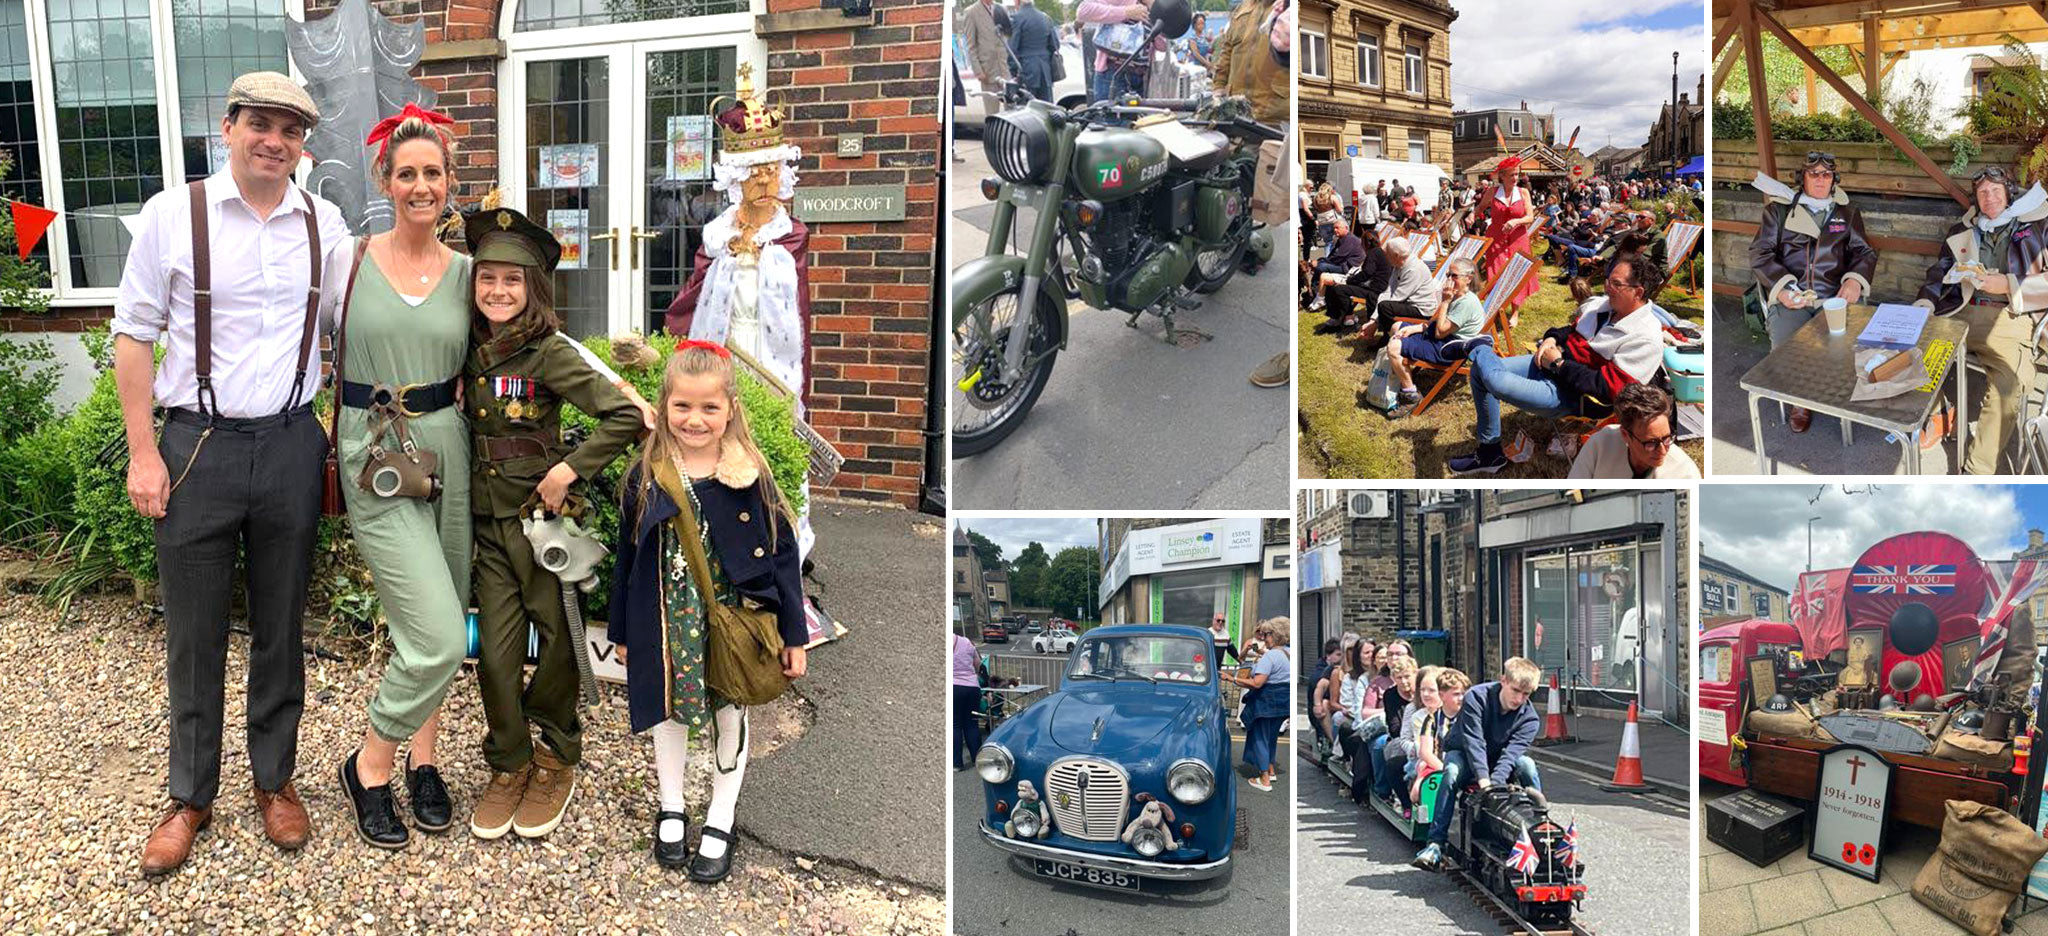 Brighouse 1940's Weekend: A Nostalgic Celebration of Community and Small Businesses